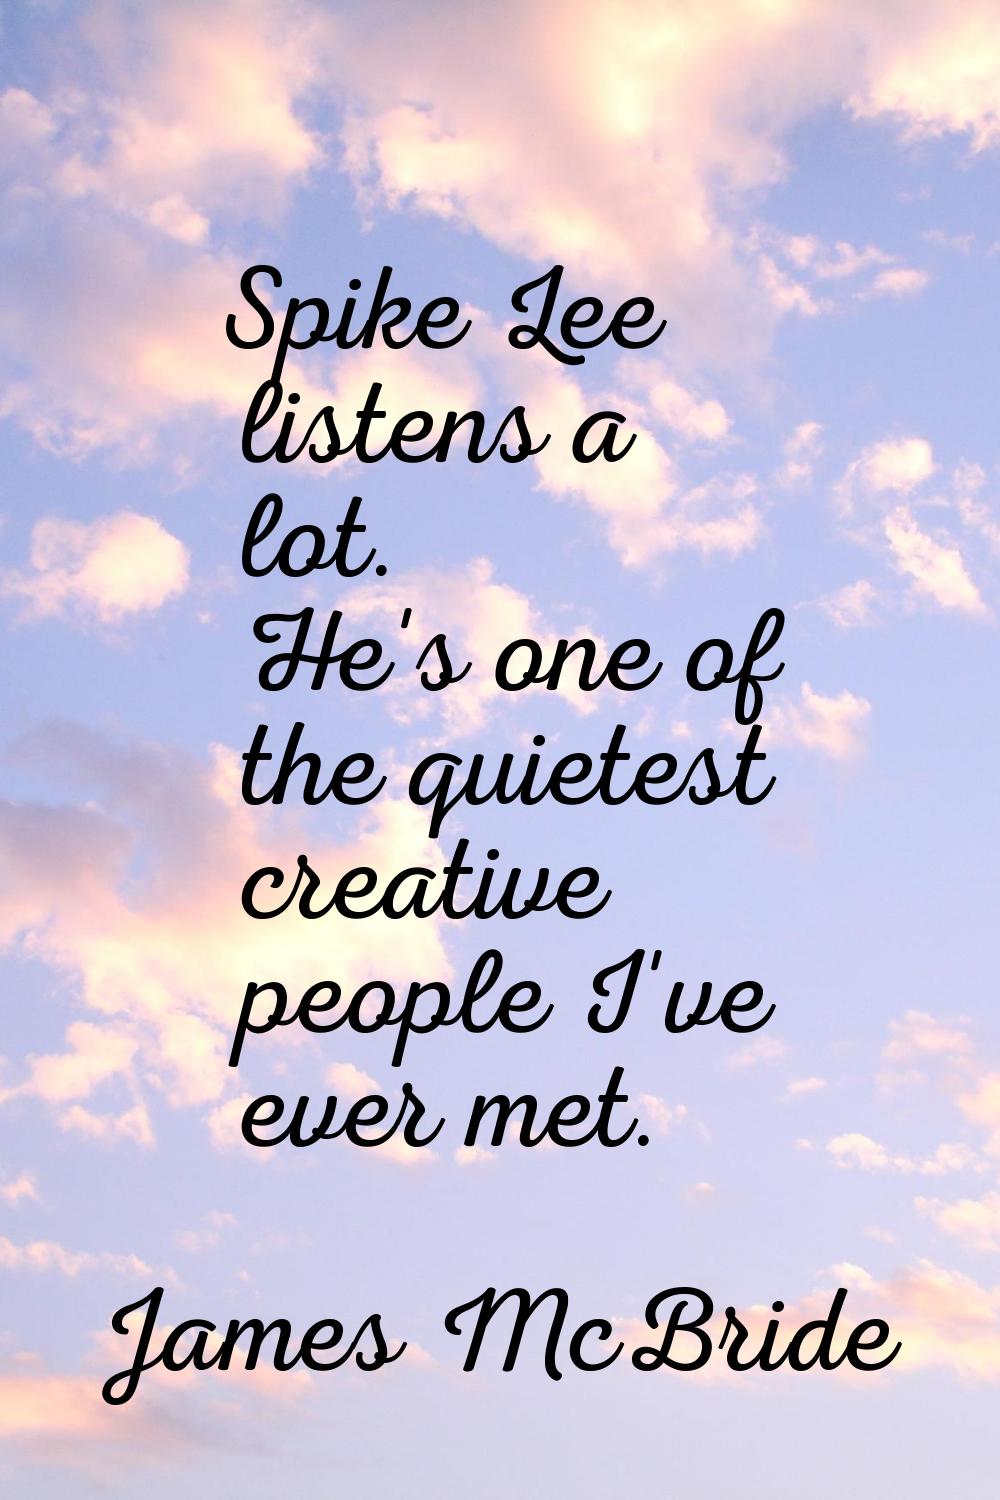 Spike Lee listens a lot. He's one of the quietest creative people I've ever met.